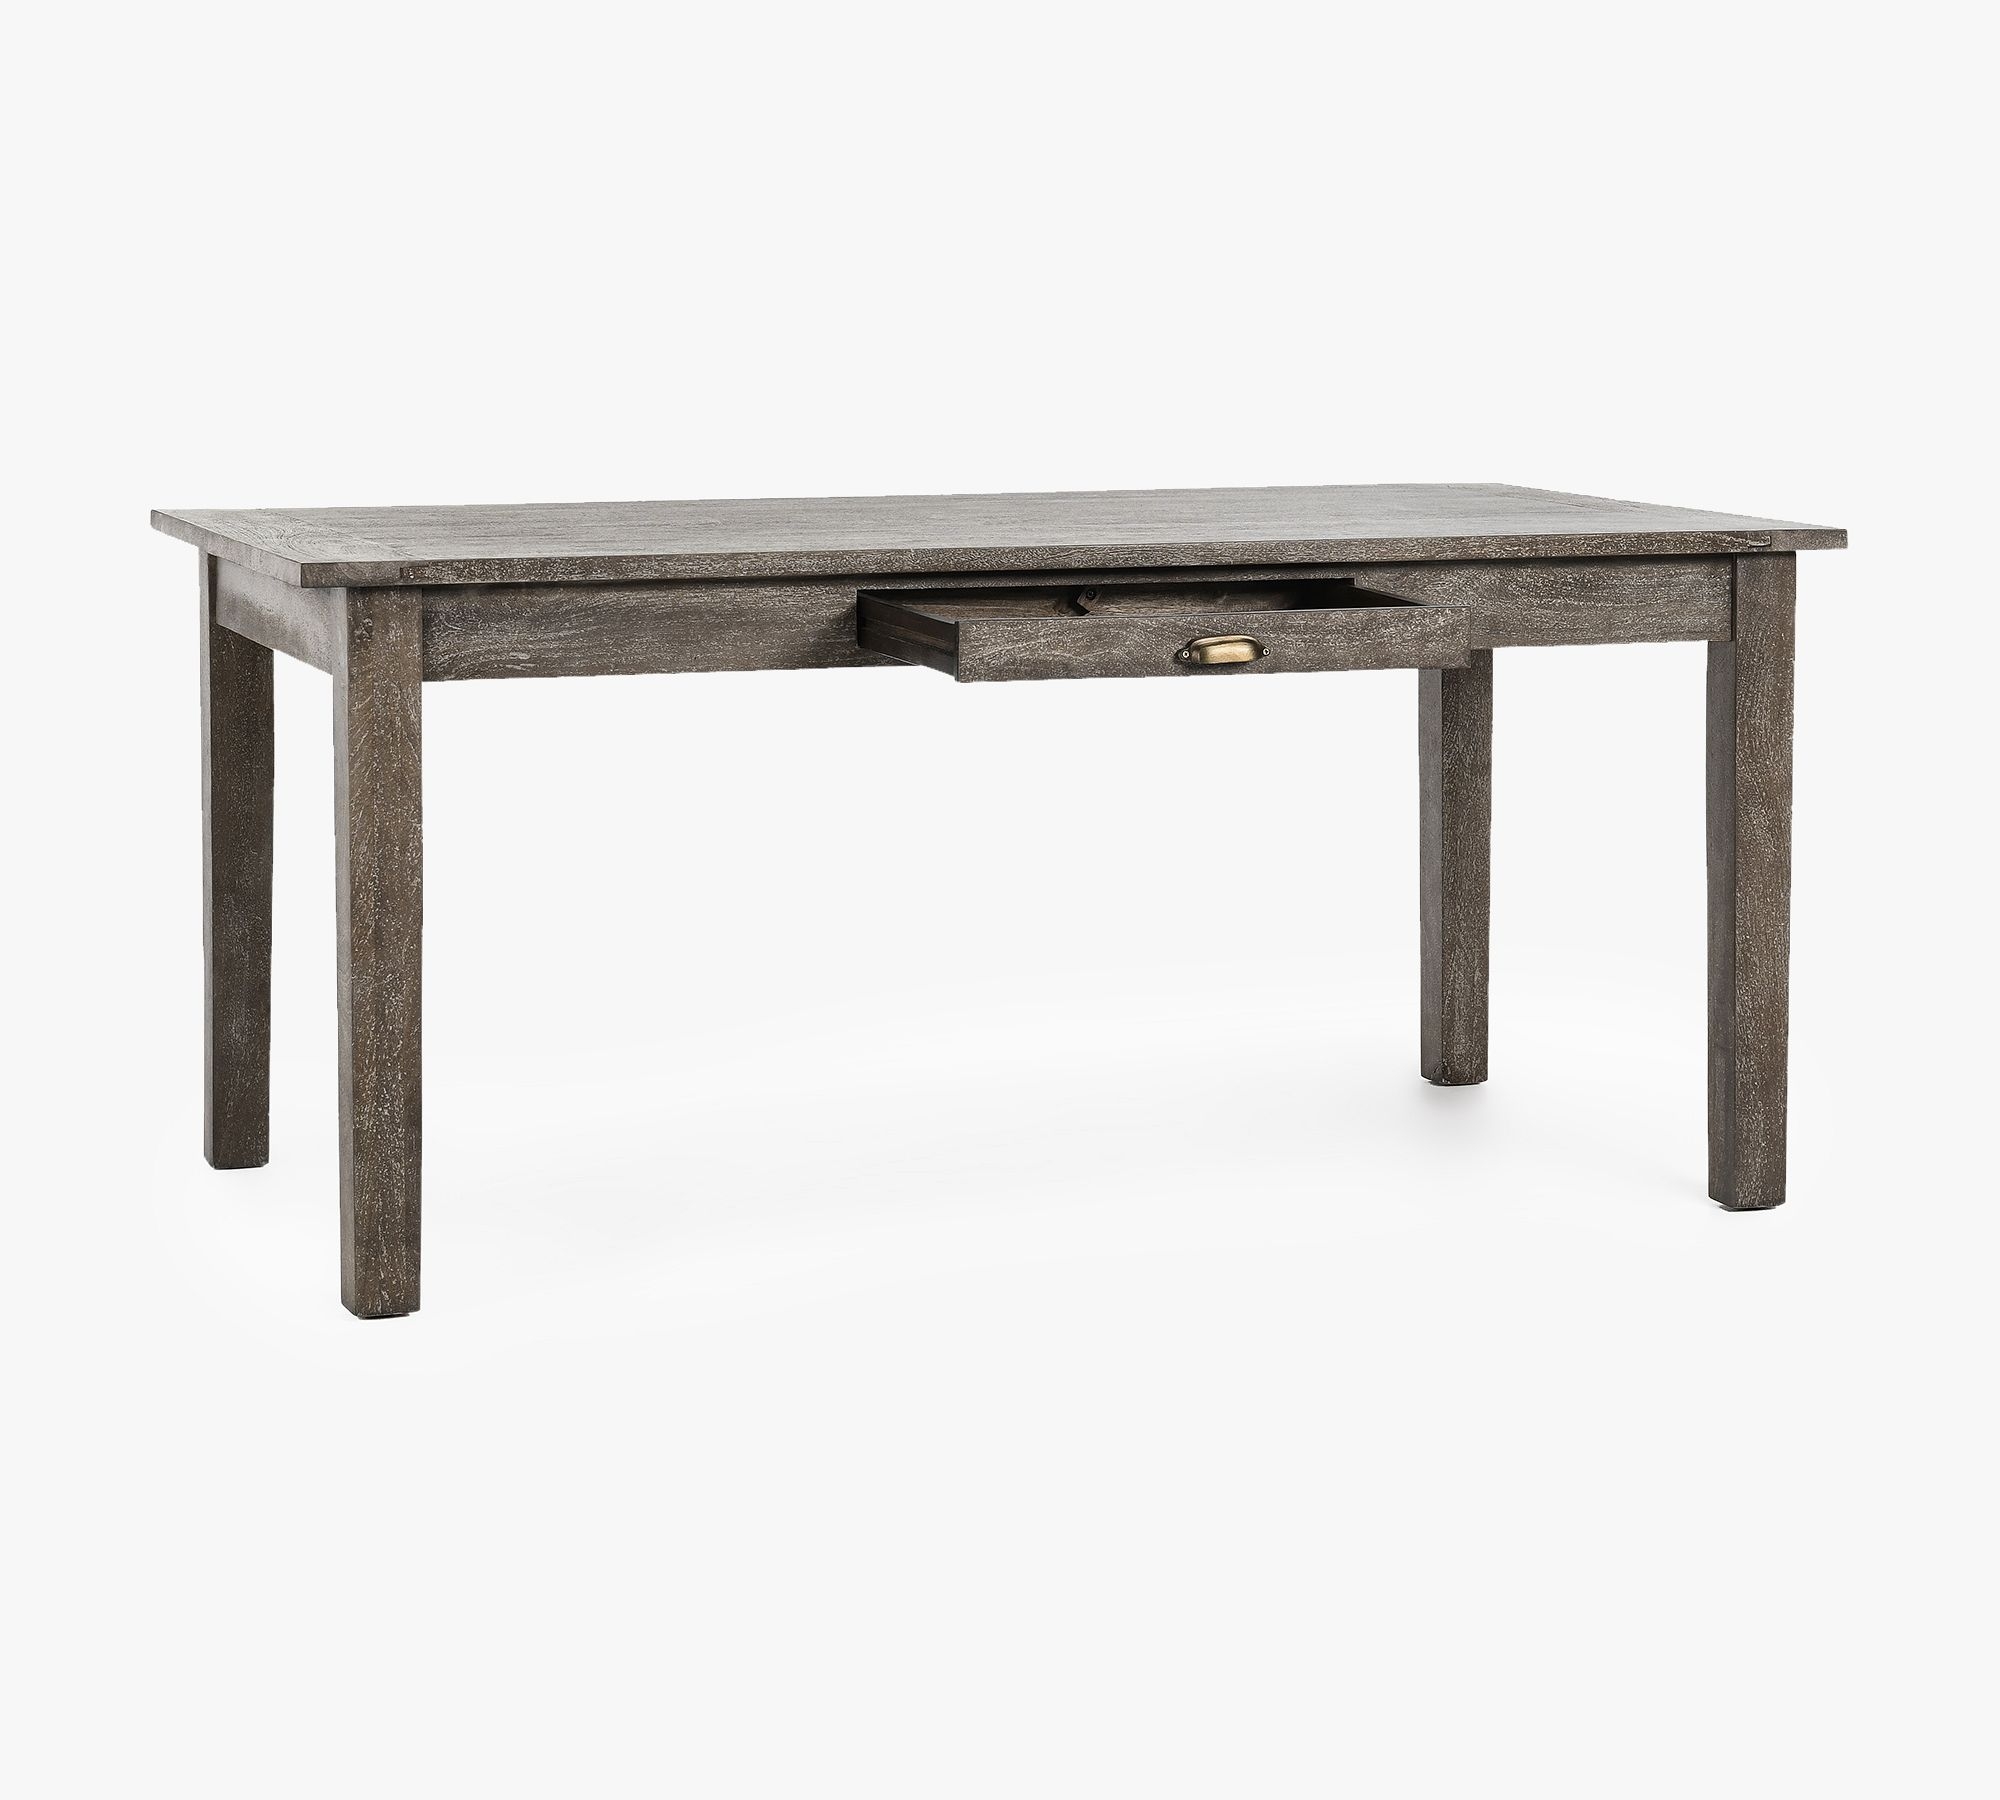 Arrington Dining Table, Antique Taupe - Image 1